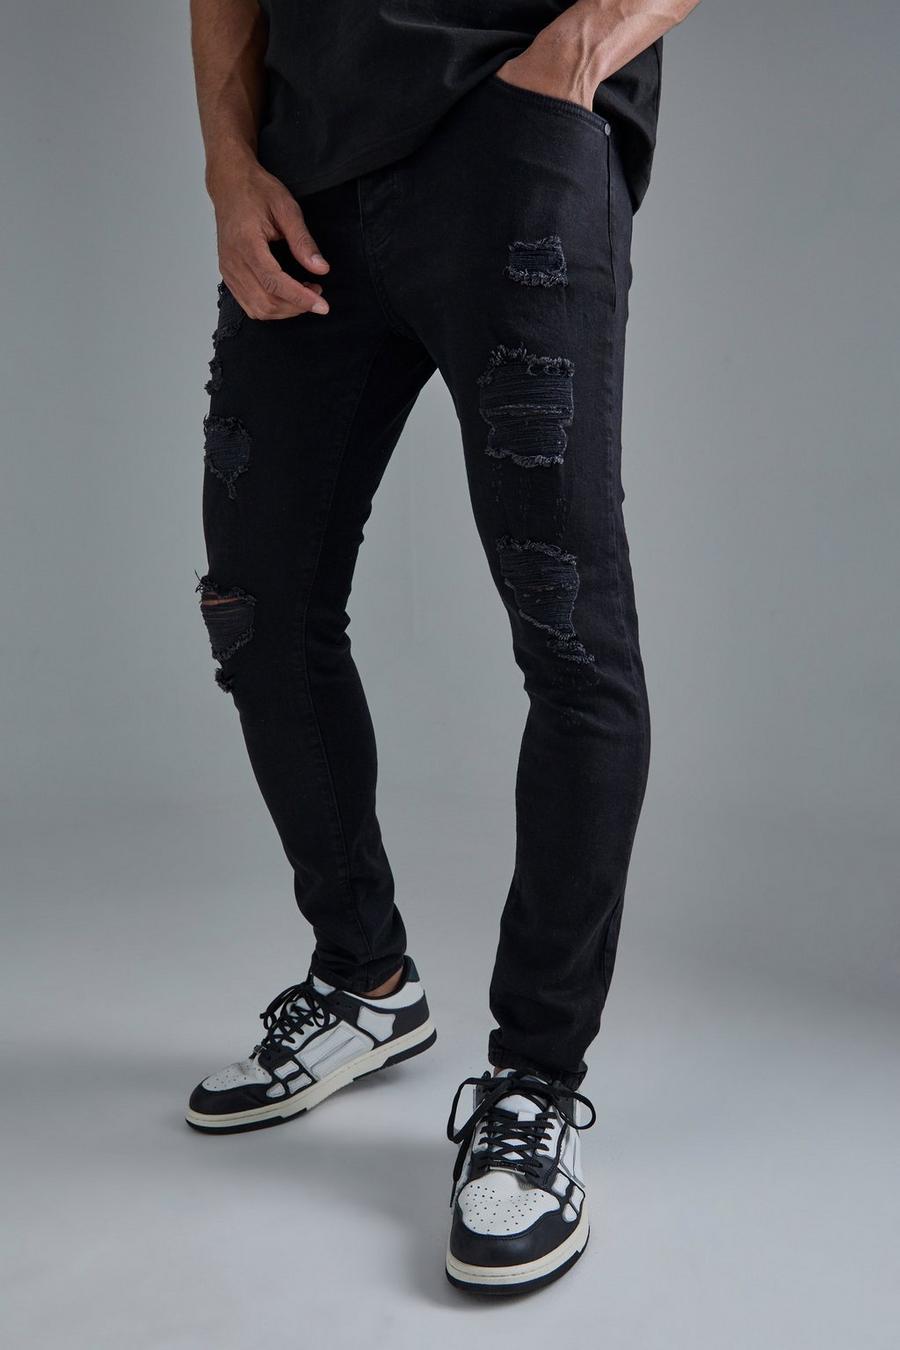 Mens Ripped Jeans, Mens Distressed Jeans